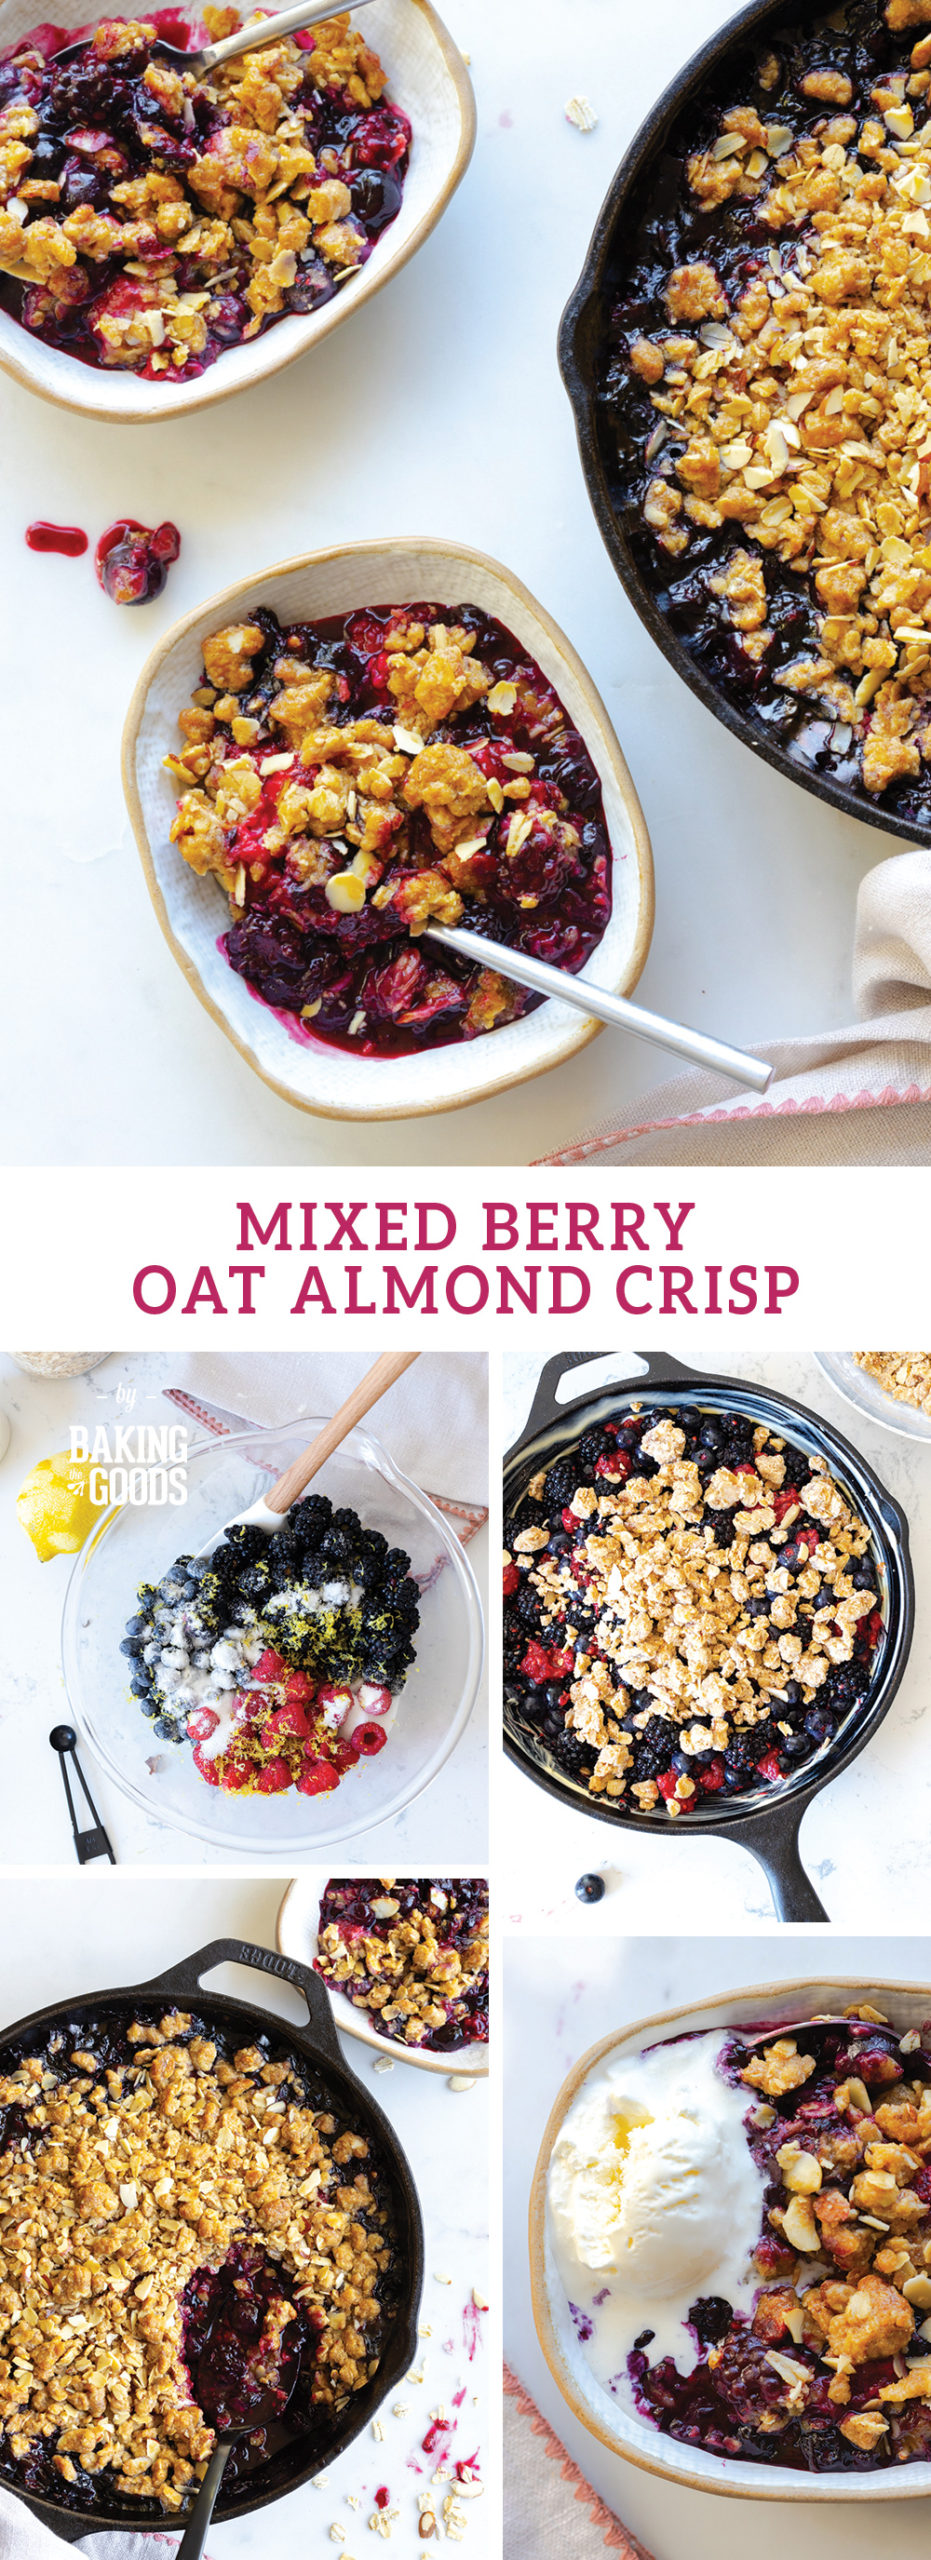 Mixed Berry Oat Almond Crisp by Baking The Goods